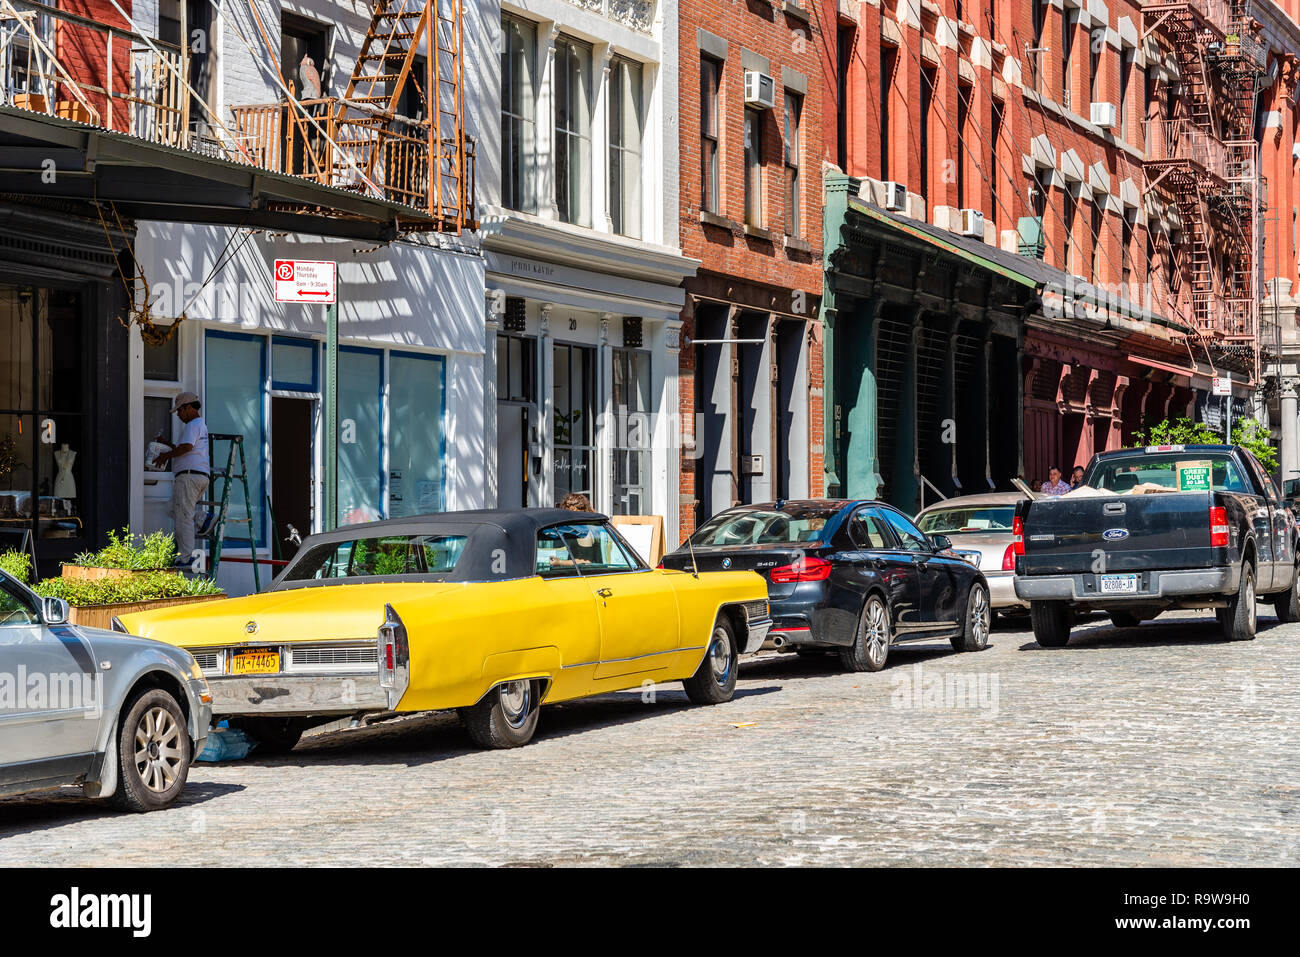 New York City, USA - June 25, 2018: Street scene with classic yellow Cadillac Eldorado convertible car in Tribeca District of Manhattan a sunny day of Stock Photo